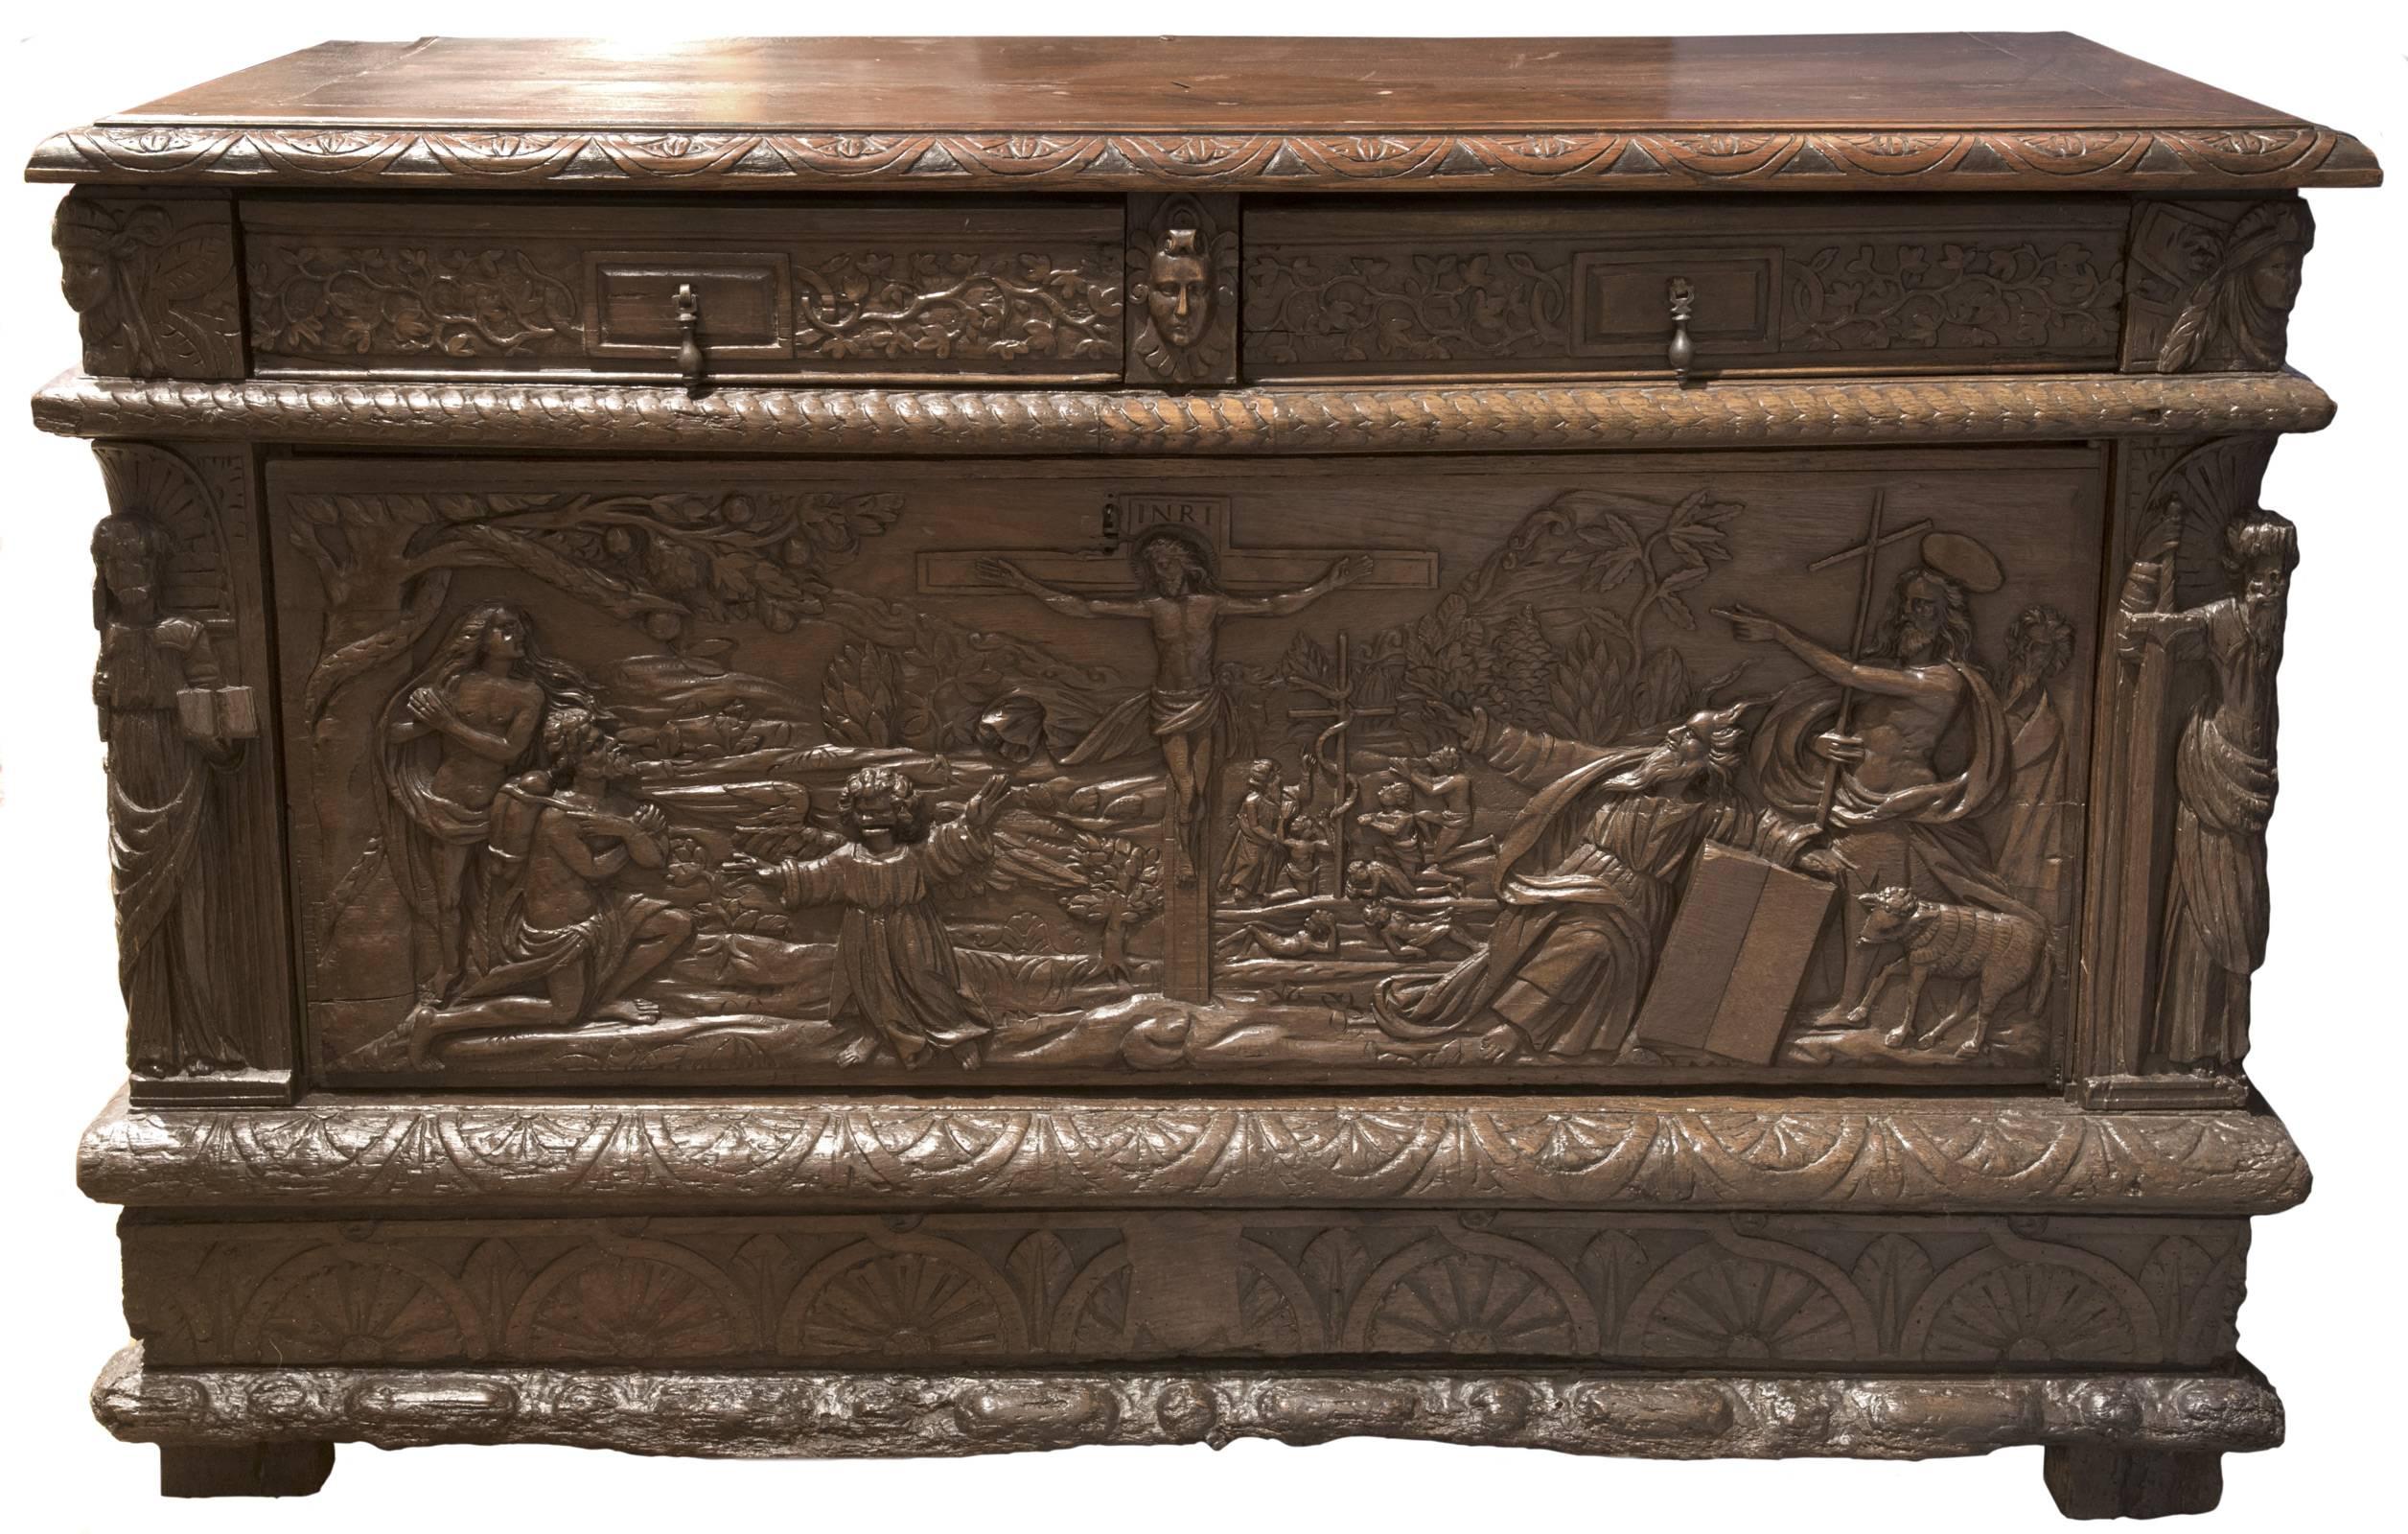 A Renaissance style hand-carved oak sideboard with two drawers with carved pulls and carved foliate motif, that sit above a single removal panel depicting a relief carving with a centre image of Christ on the cross, which is flanked with depictions